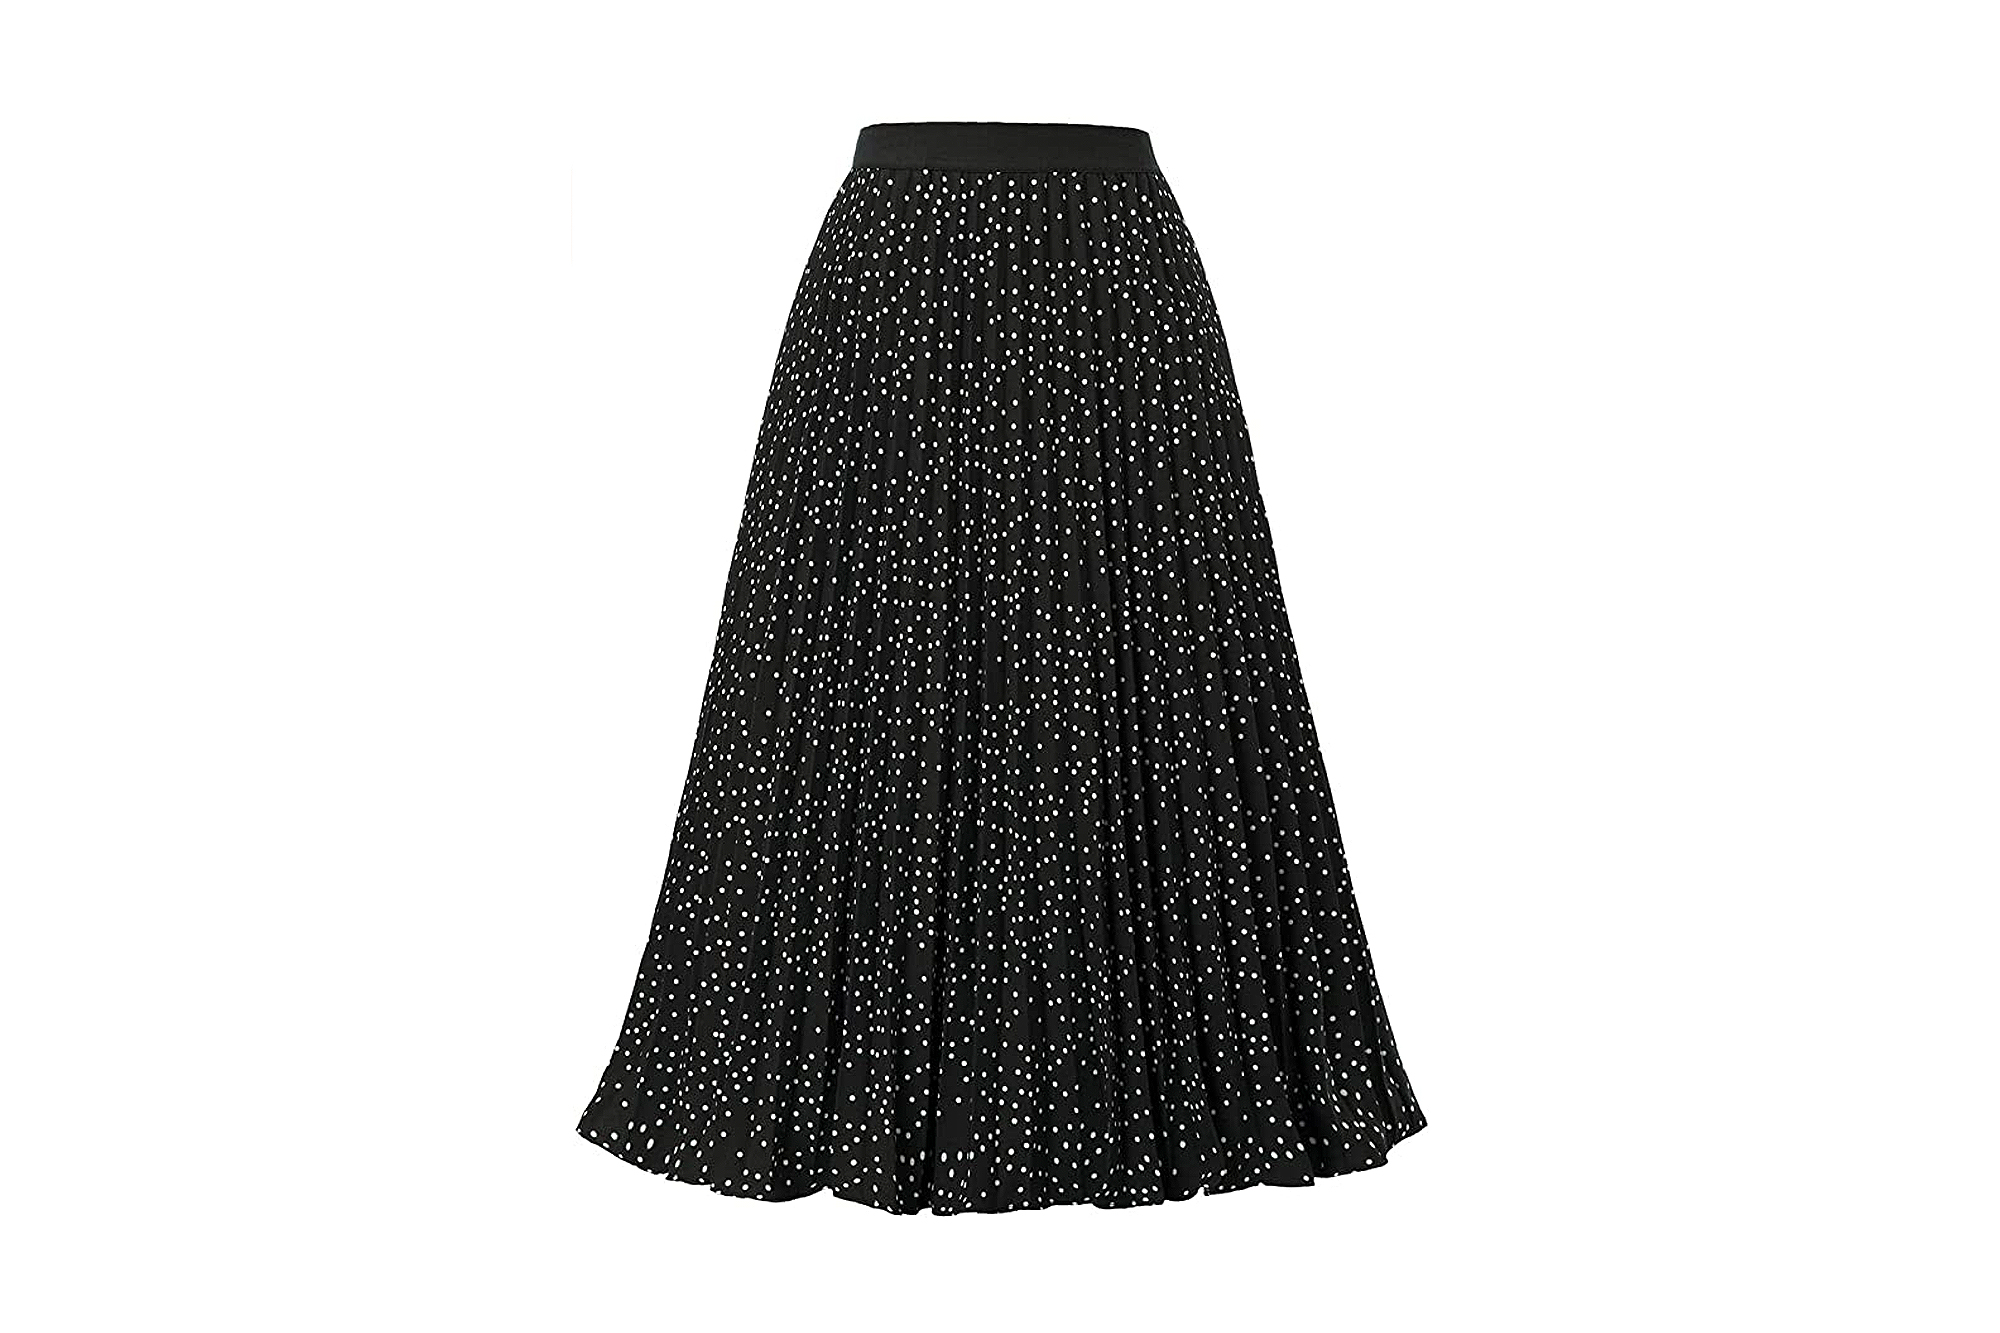 Kate Kasin Pleated Skirt Can Be Styled in So Many Fun Ways